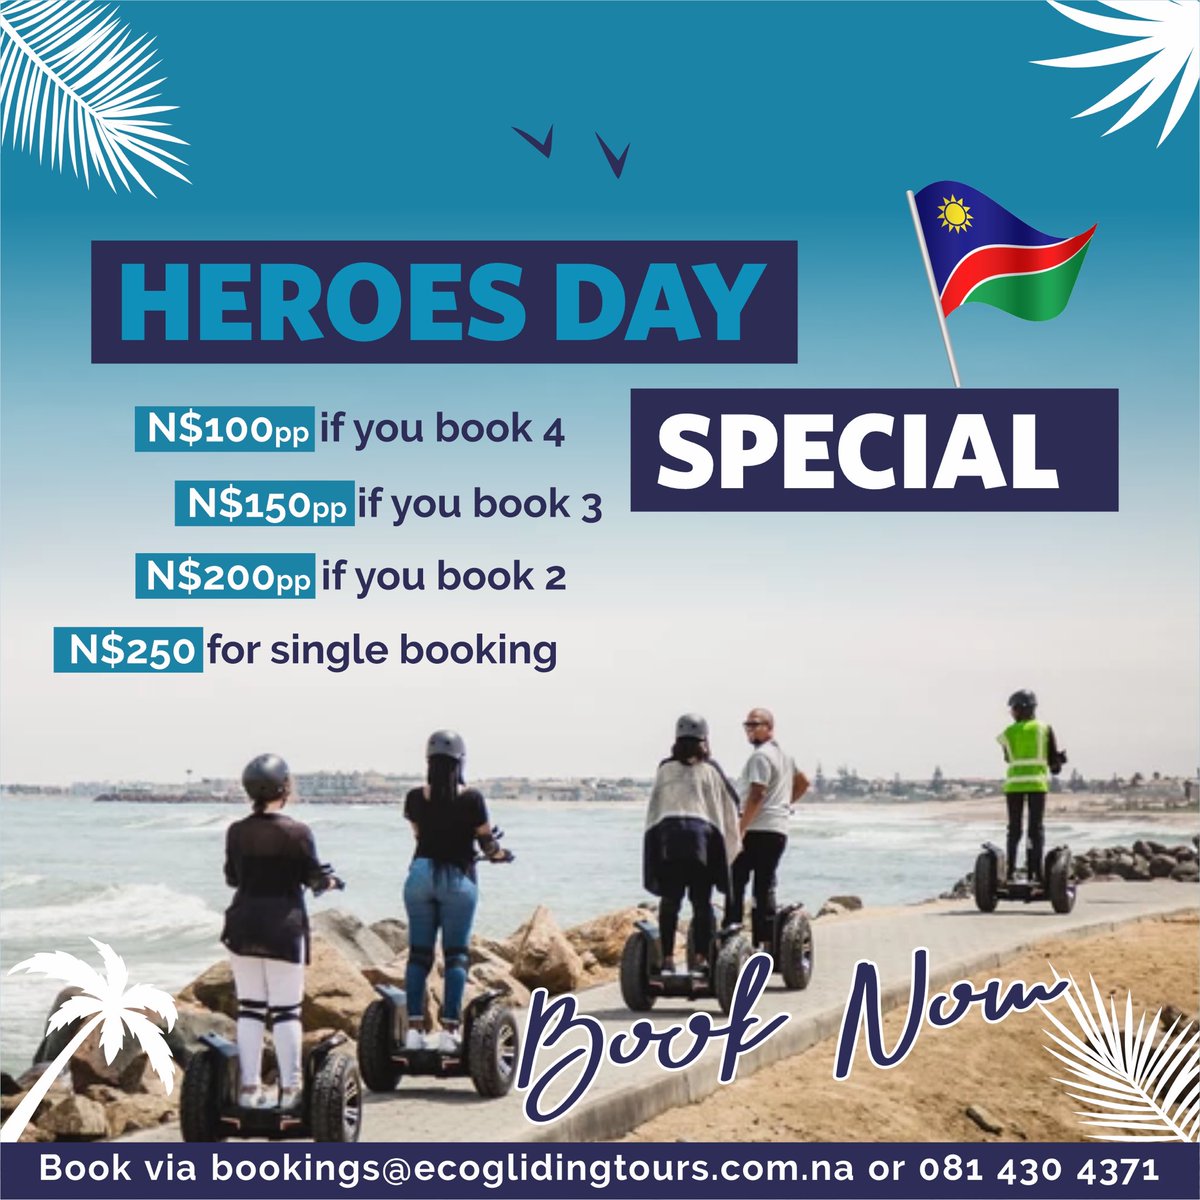 We’re celebrating Heroes Day with a special for Namibians. Offer valid until 31 August 2020.
-
- 
#ecoglidingtours #ecotourism #namibia #swakopmund #travel #lockdown #localislekker #localtravel